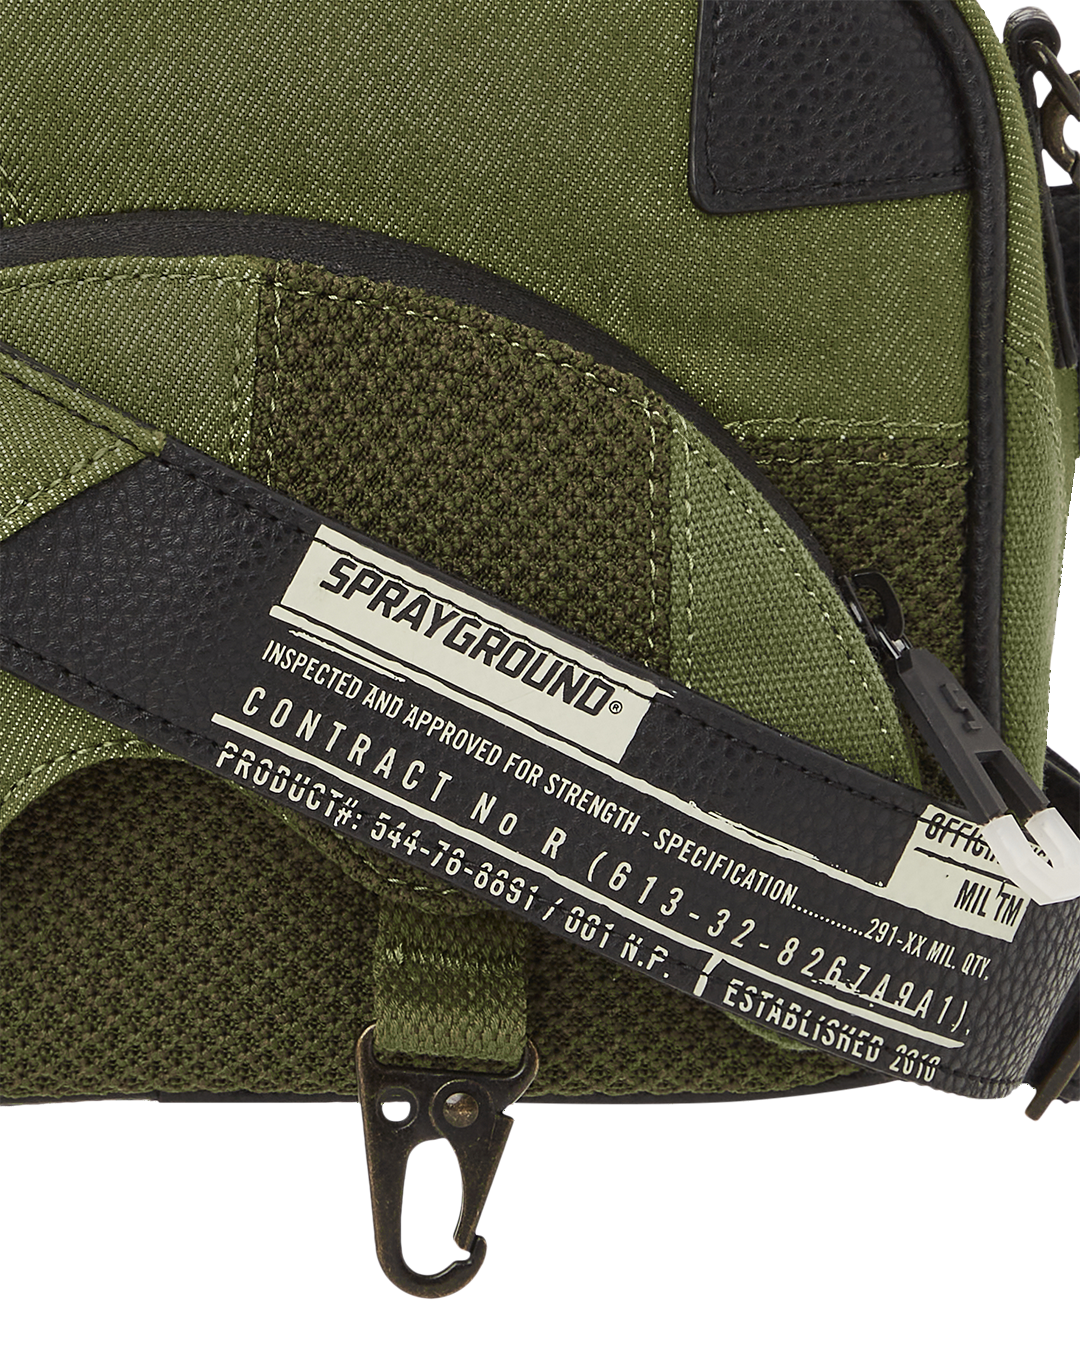 SPRAYGROUND® TOILETRY SPECIAL OPS OPERATION SUCCE$$ BRICKSIDE TOILETRY MESSENGER BAG